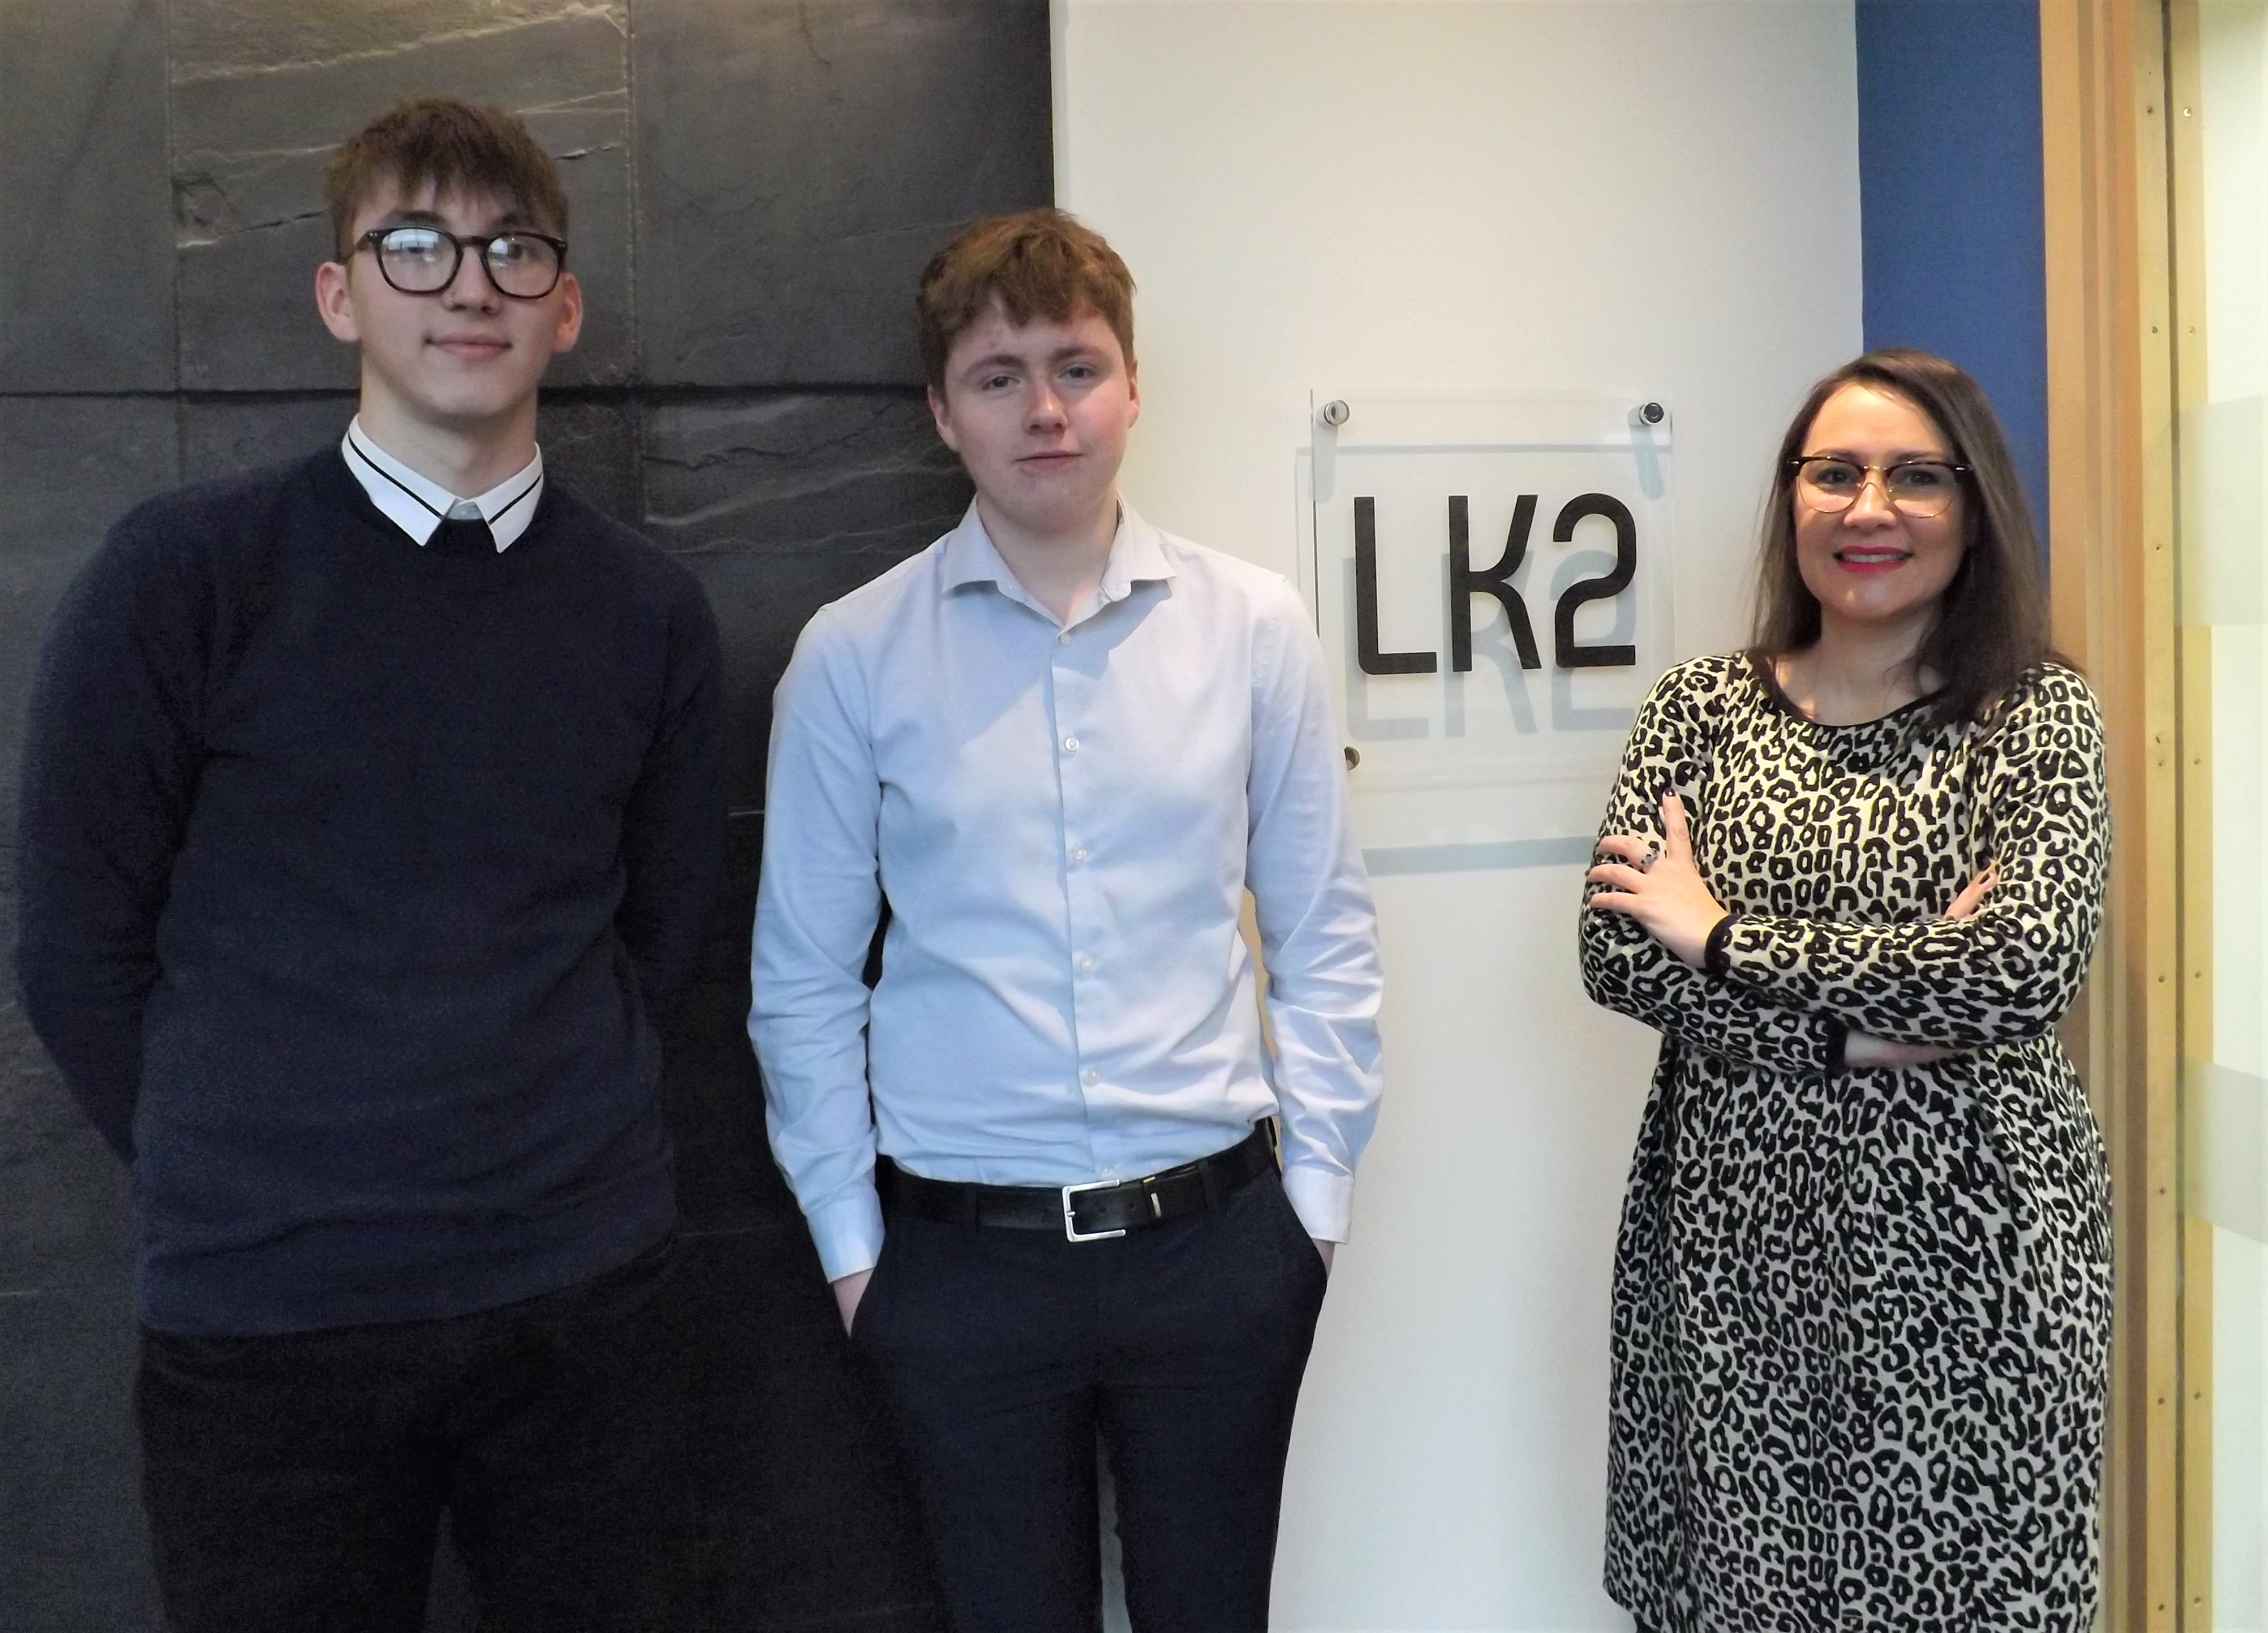 LK2 WELCOMES NEW TALENT TO ITS TEAM WITH TRIO OF NEW HIRES @LK2_Group